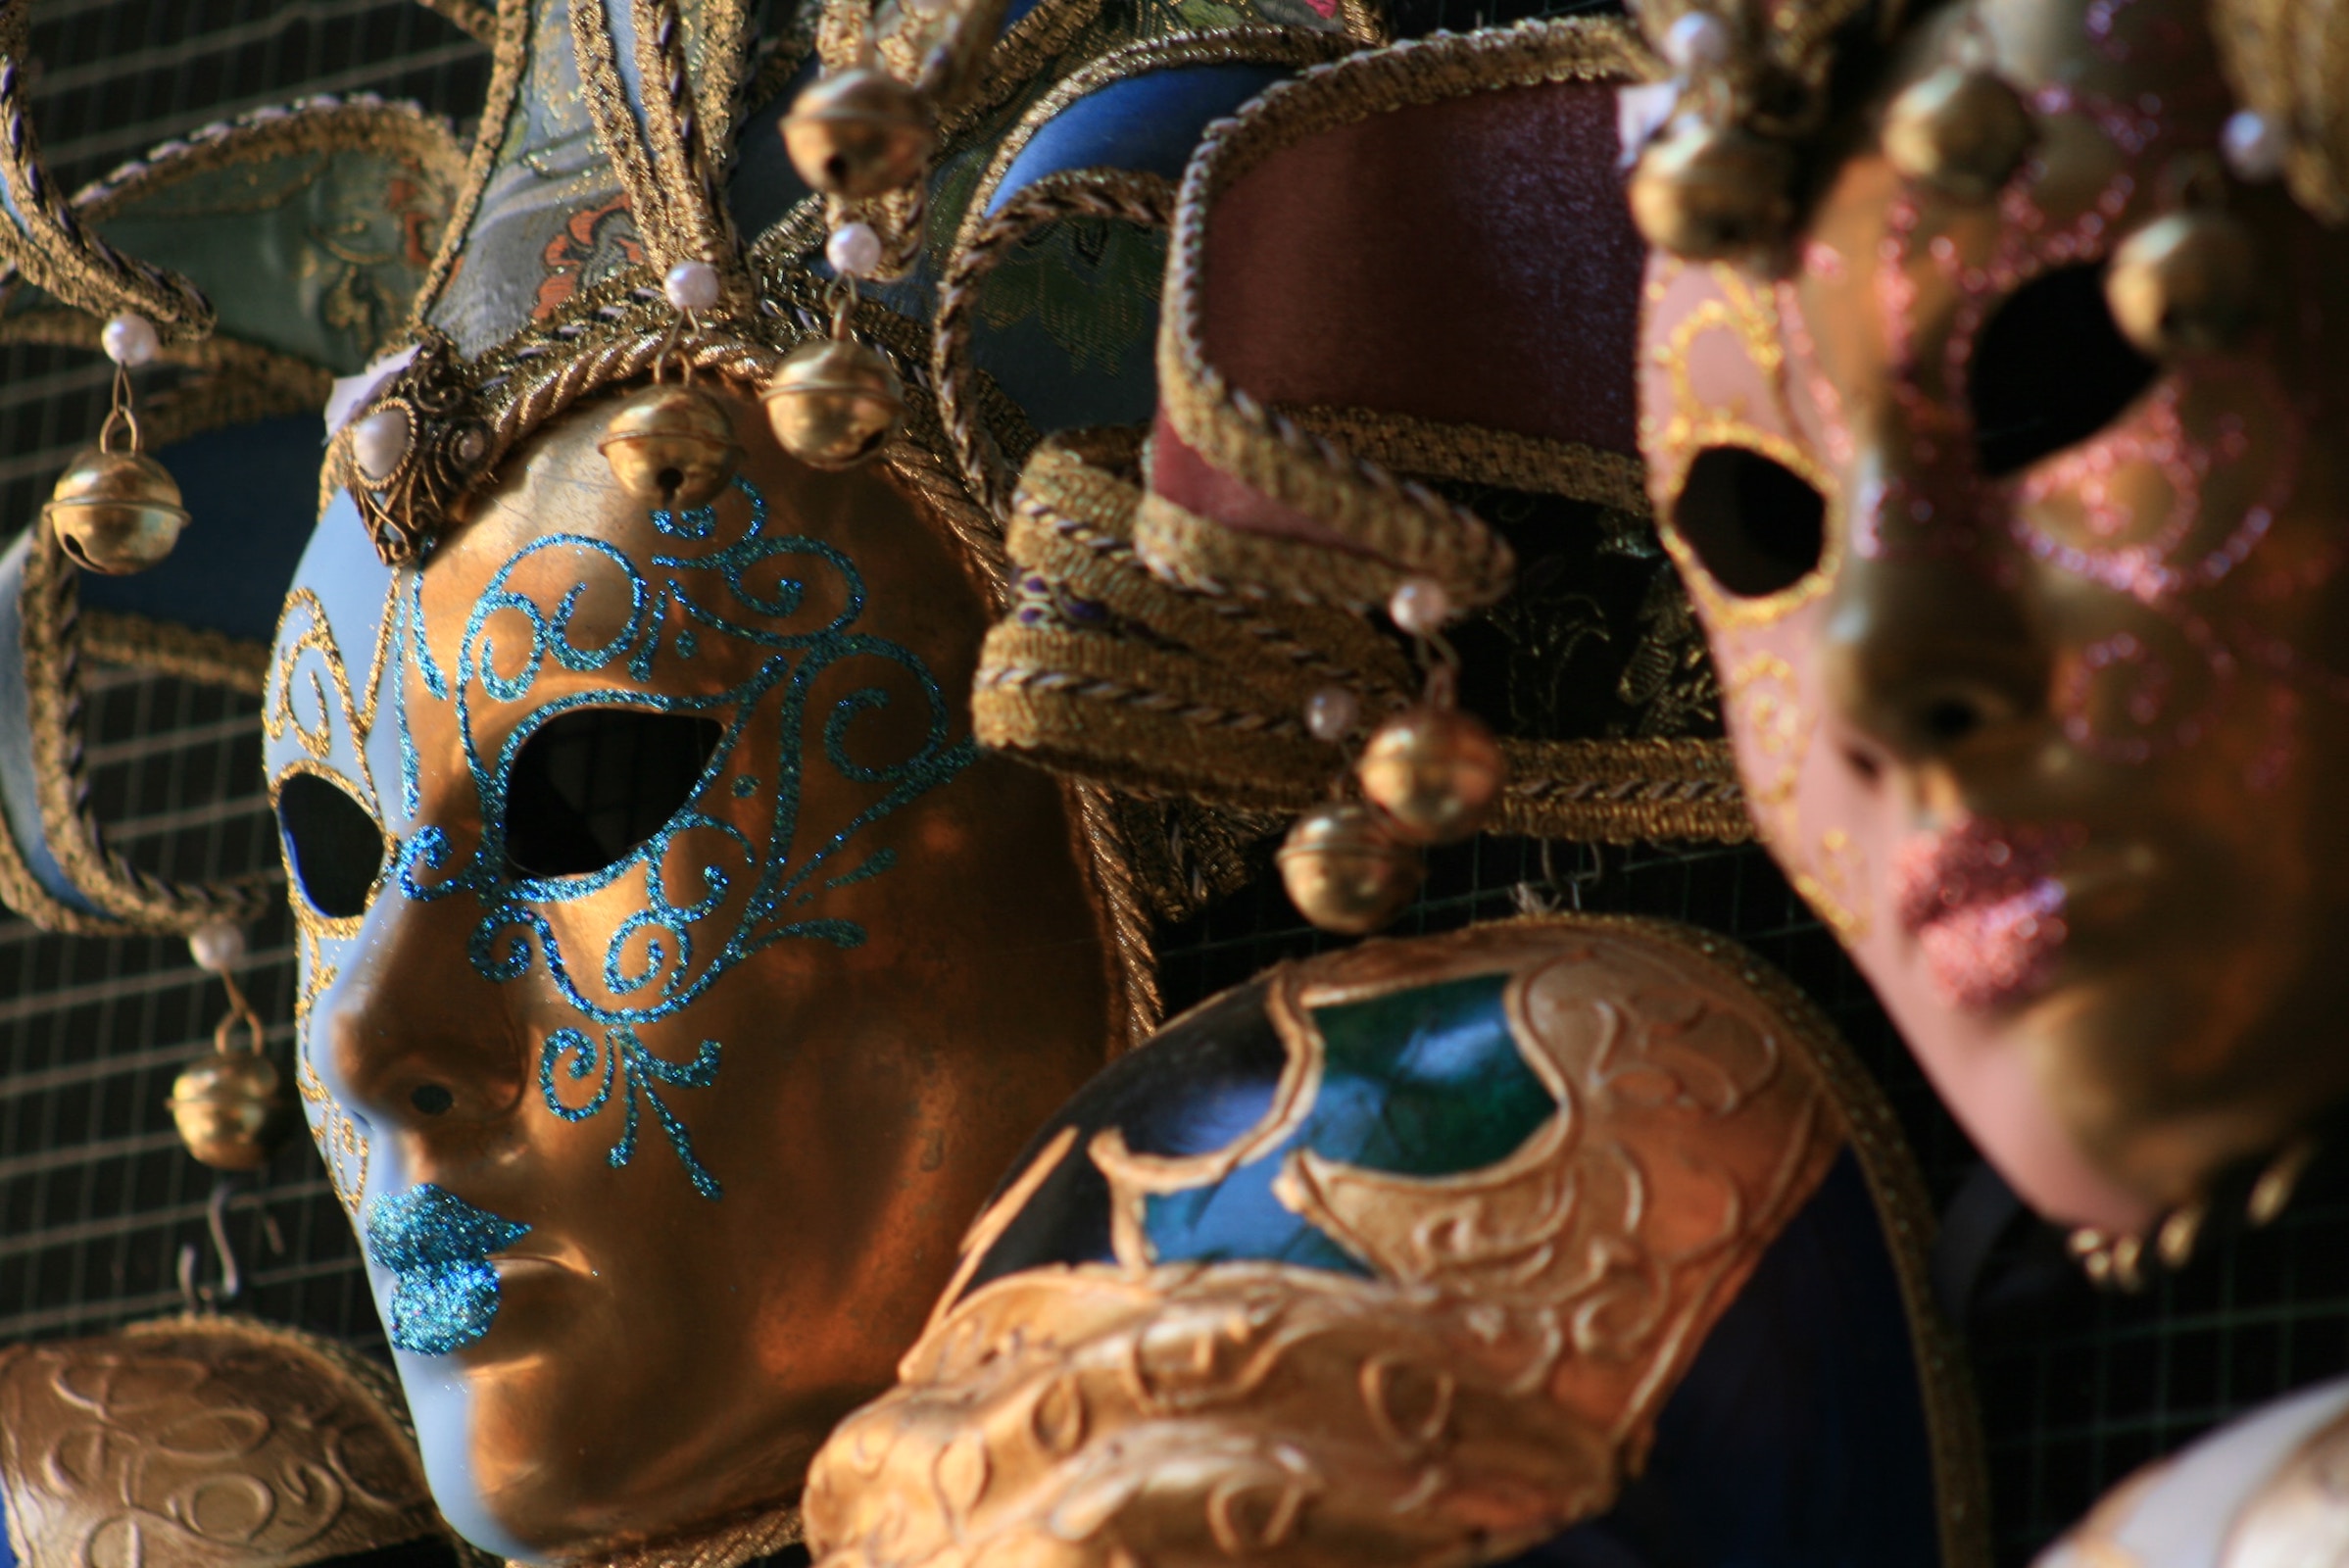 What to Wear to a Masquerade Party